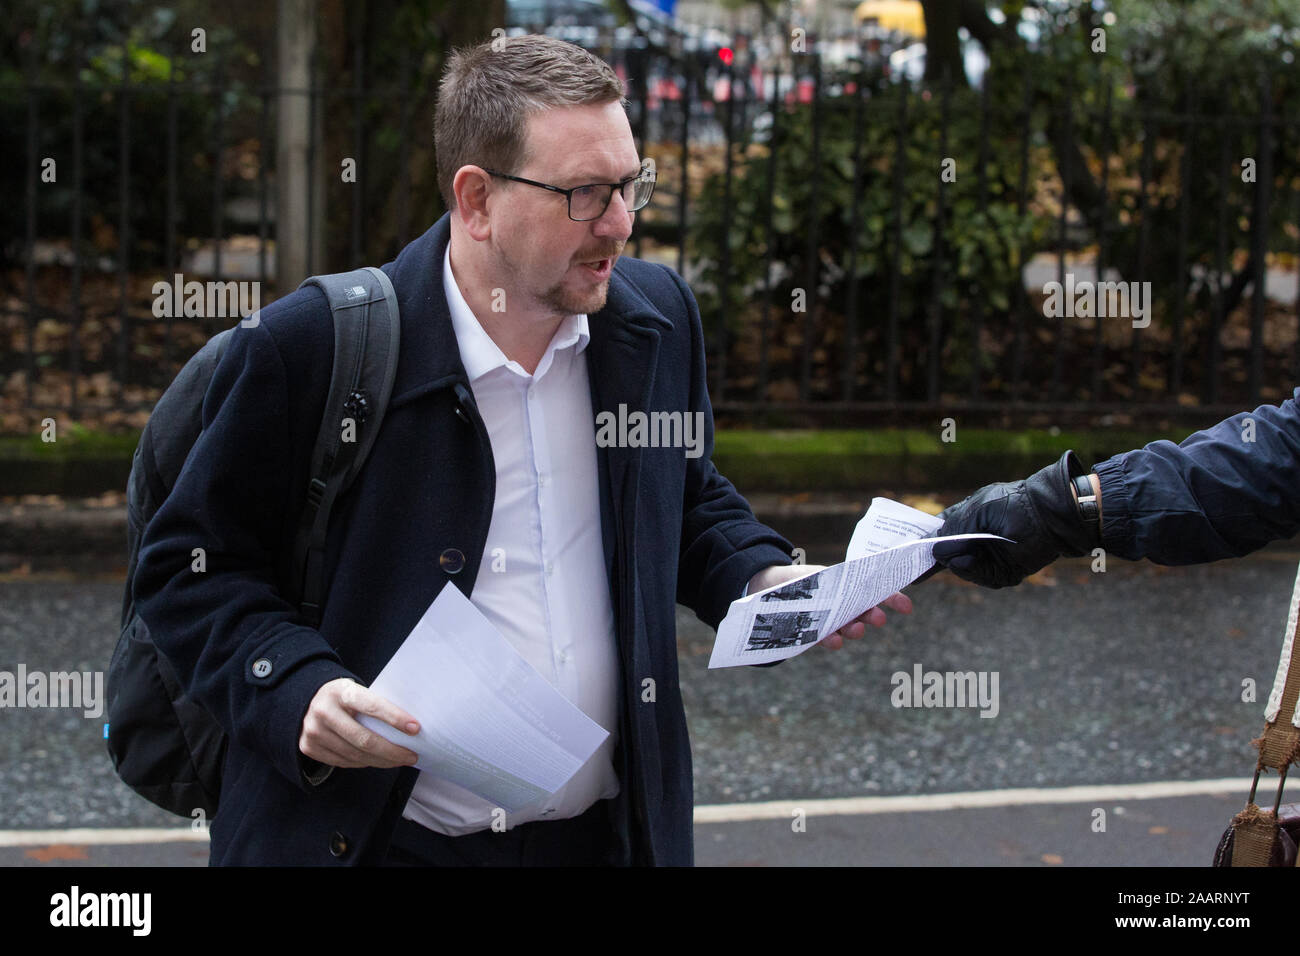 London, UK. 16 November, 2019. Andrew Gwynne, Shadow Communities Secretary, arrives at Labour’s Clause V meeting. The Clause V meeting, chaired by the Stock Photo